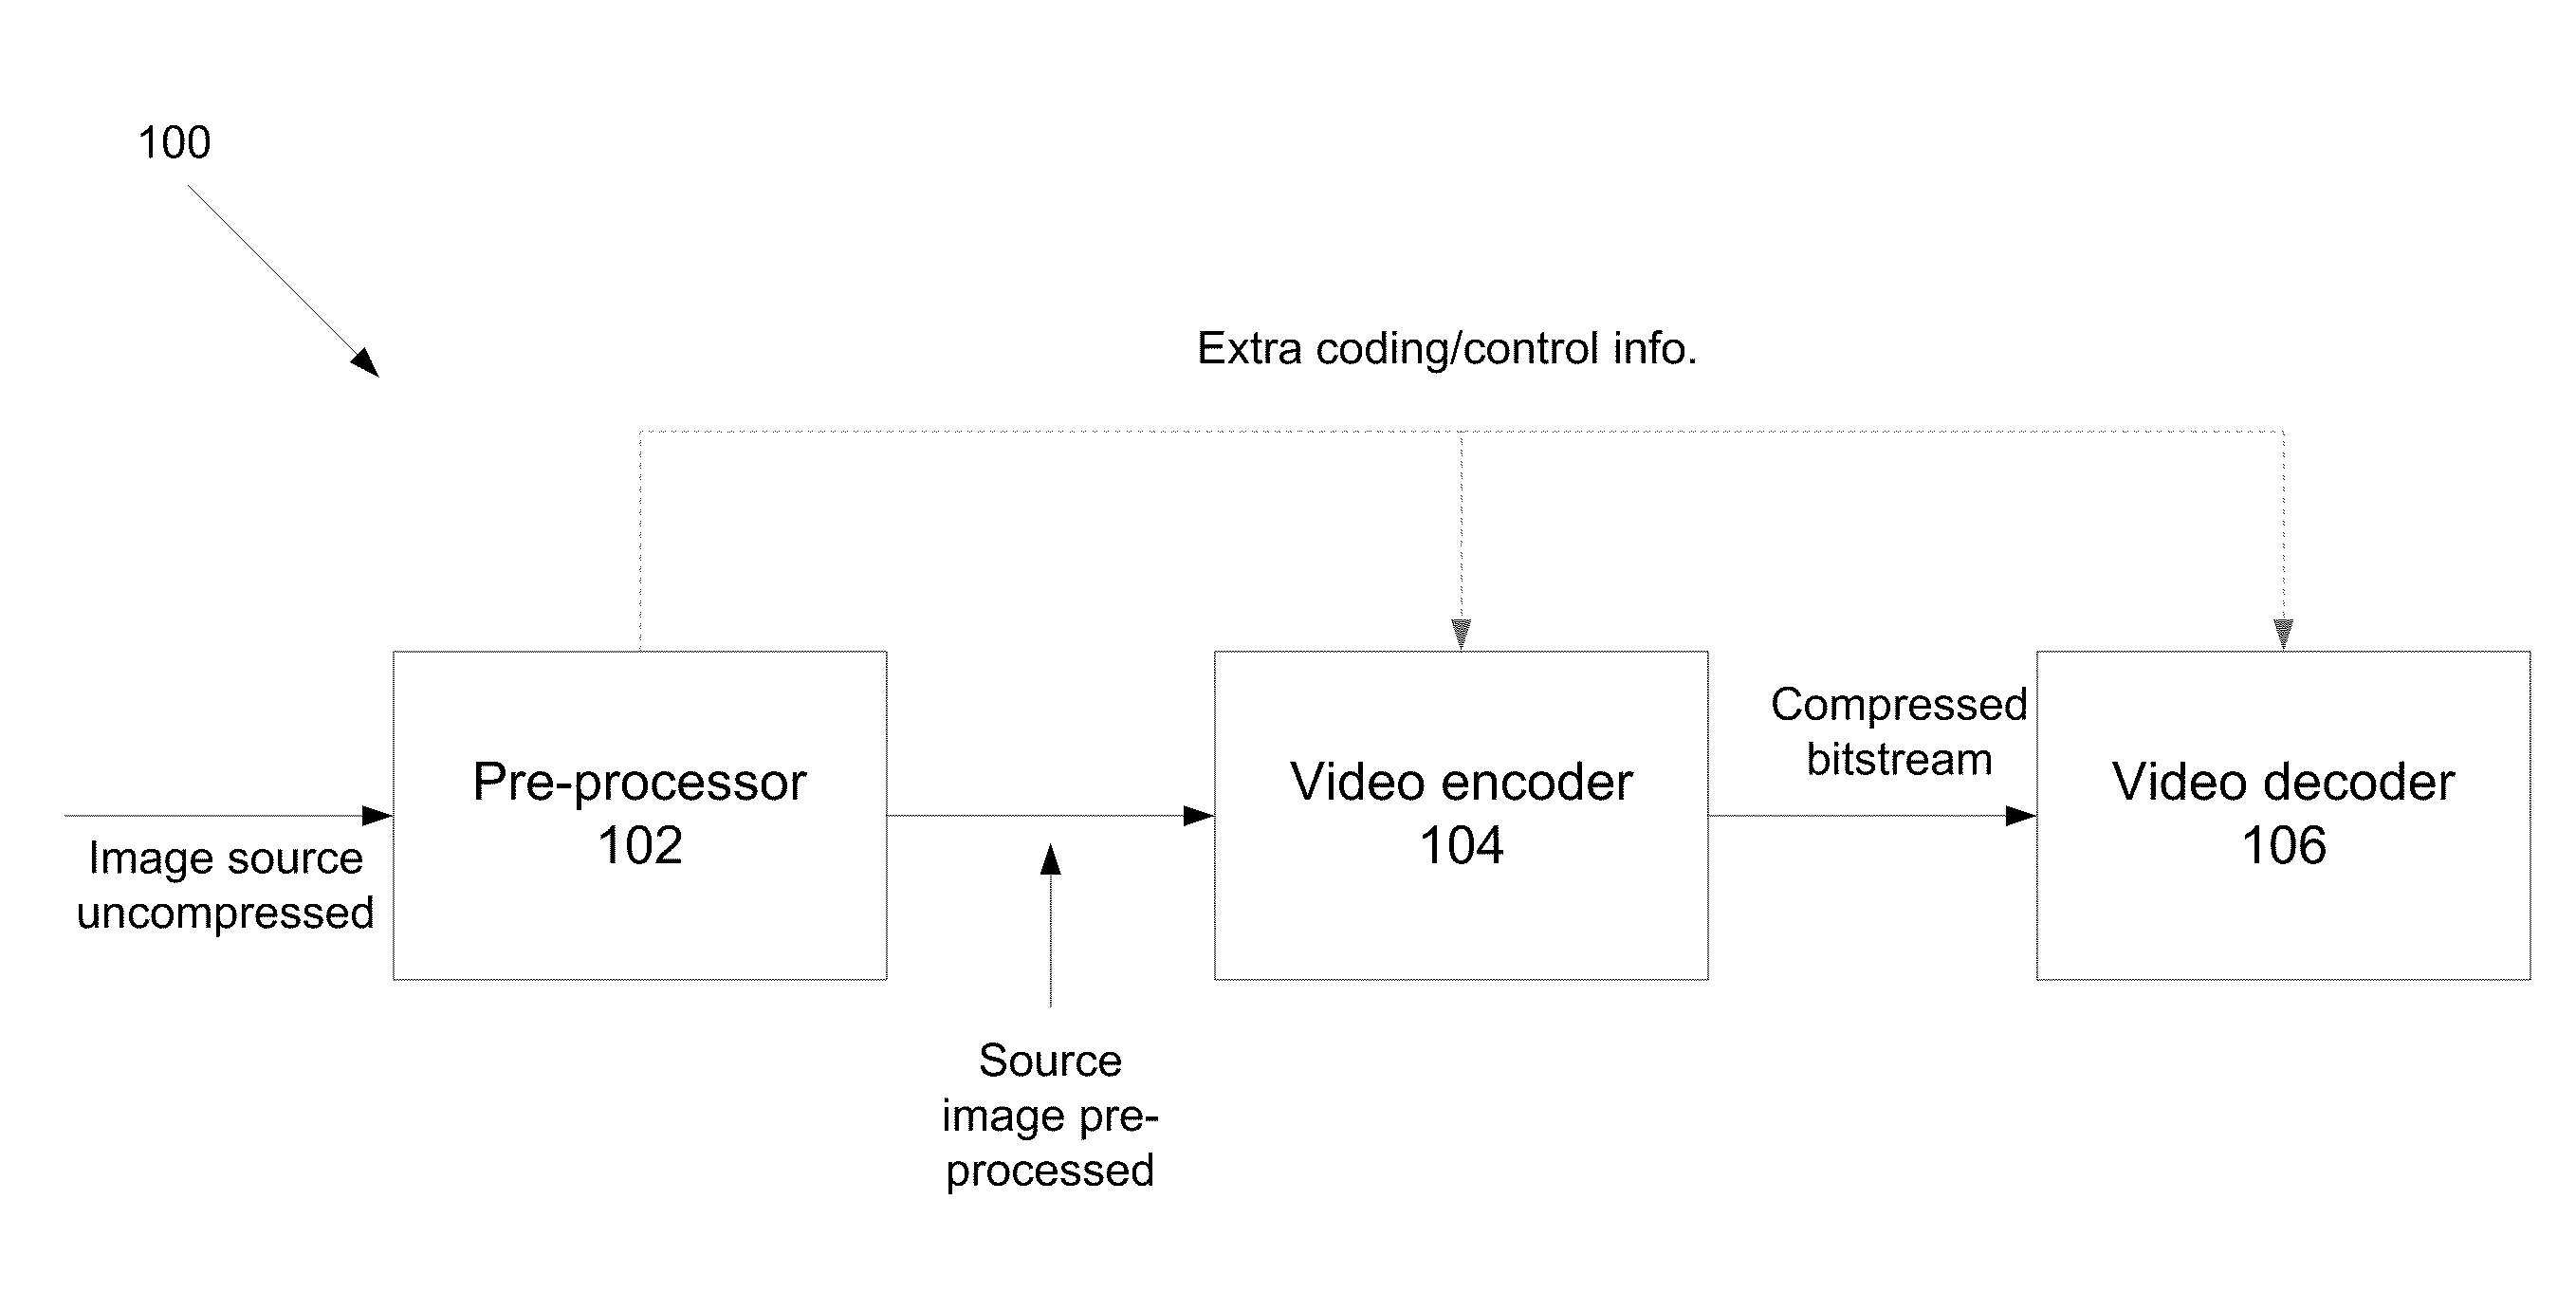 Blind noise analysis for video compression